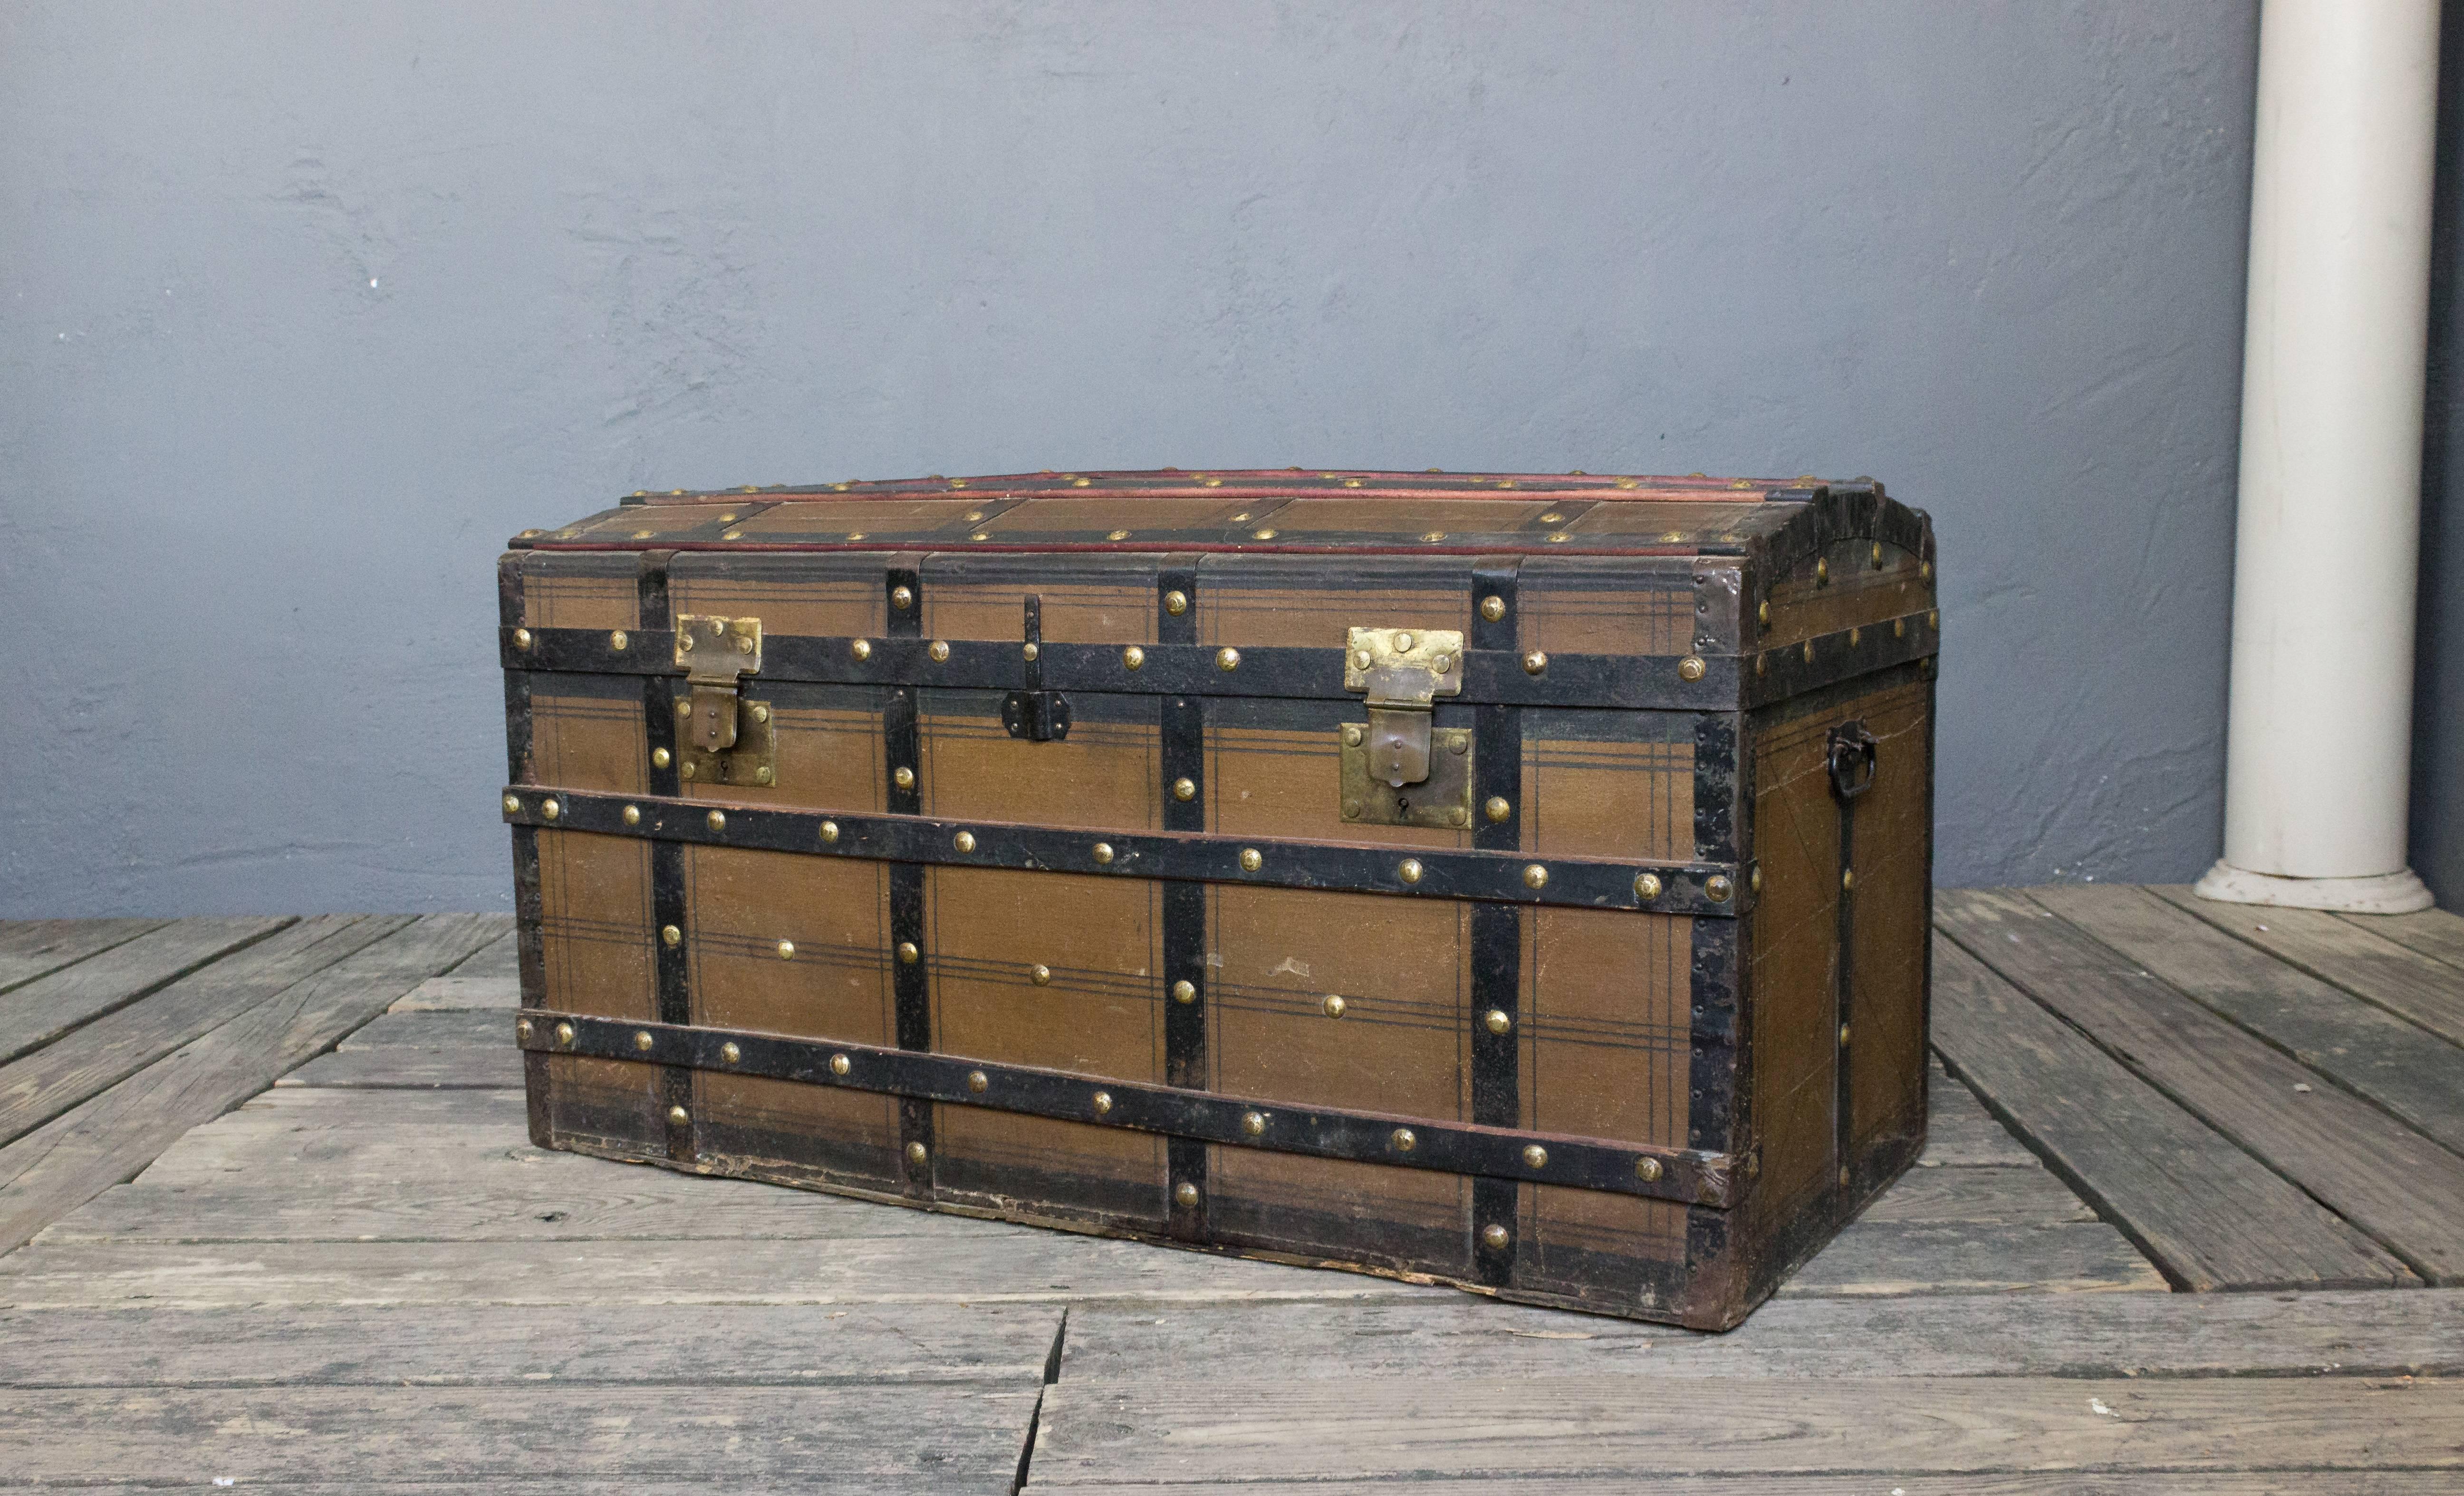 French 1920s steamer trunk with brass studs on a wooden ribbing. The clasps are also brass. It has iron handles on the sides.